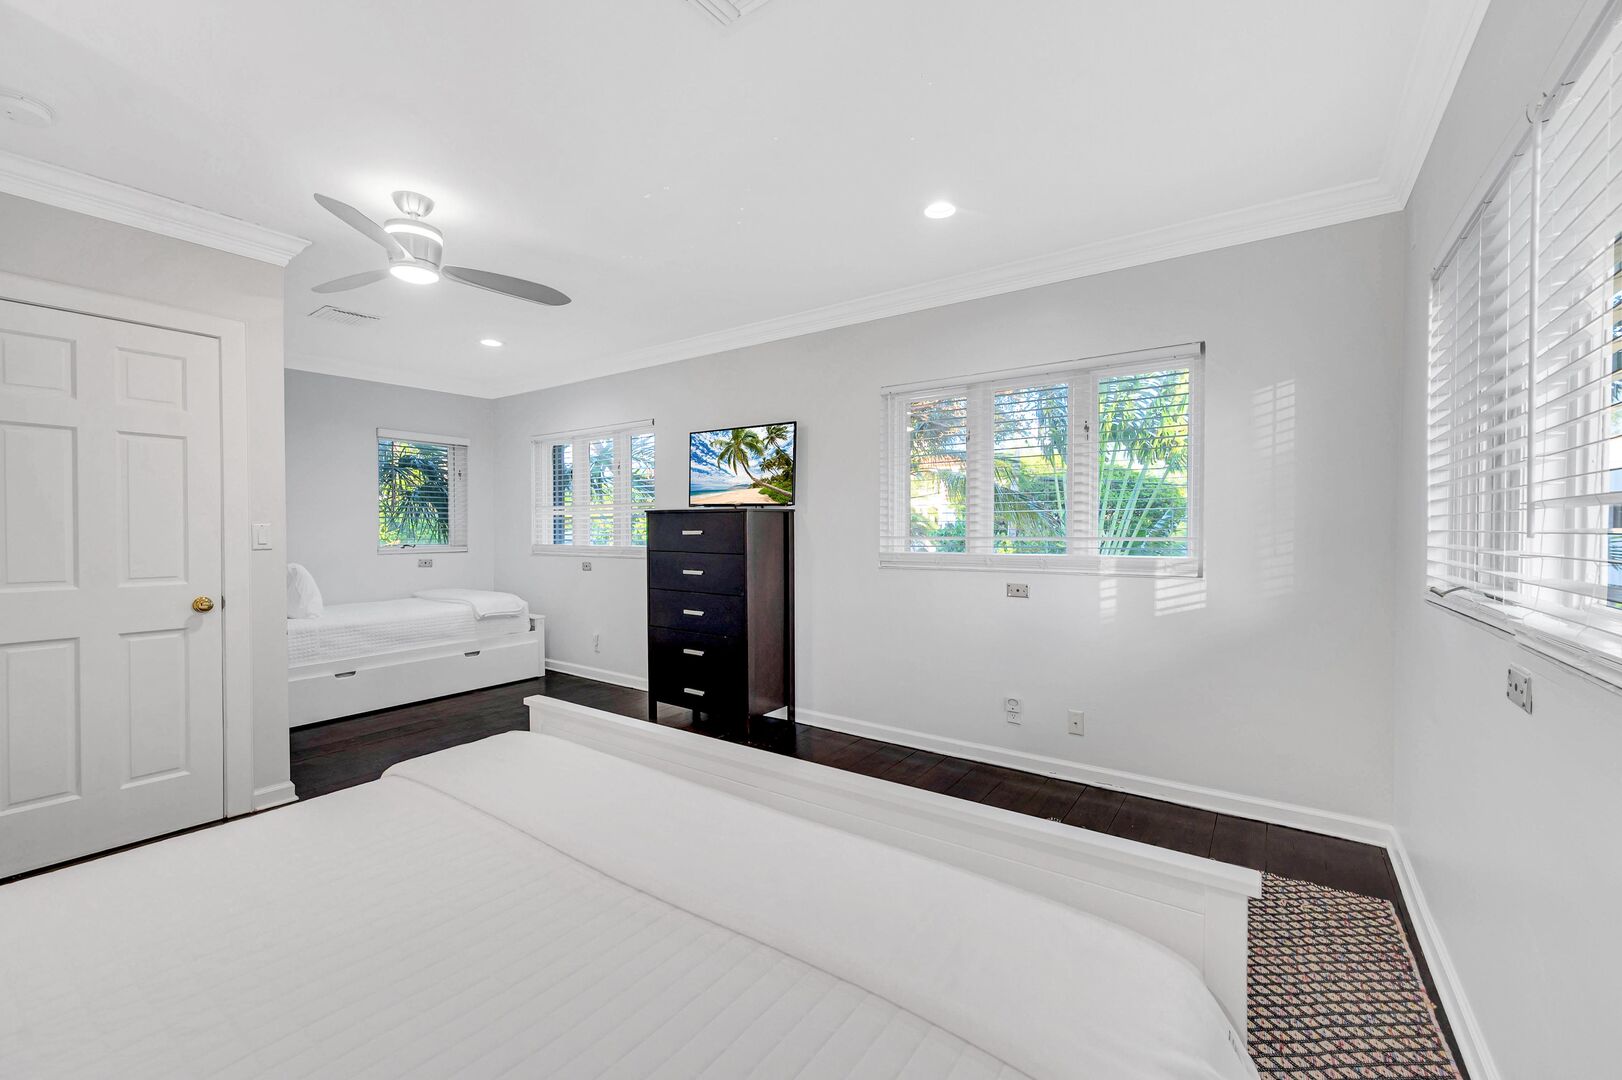 Bedroom five features a queen size bed, a trundle bed and a Smart TV.